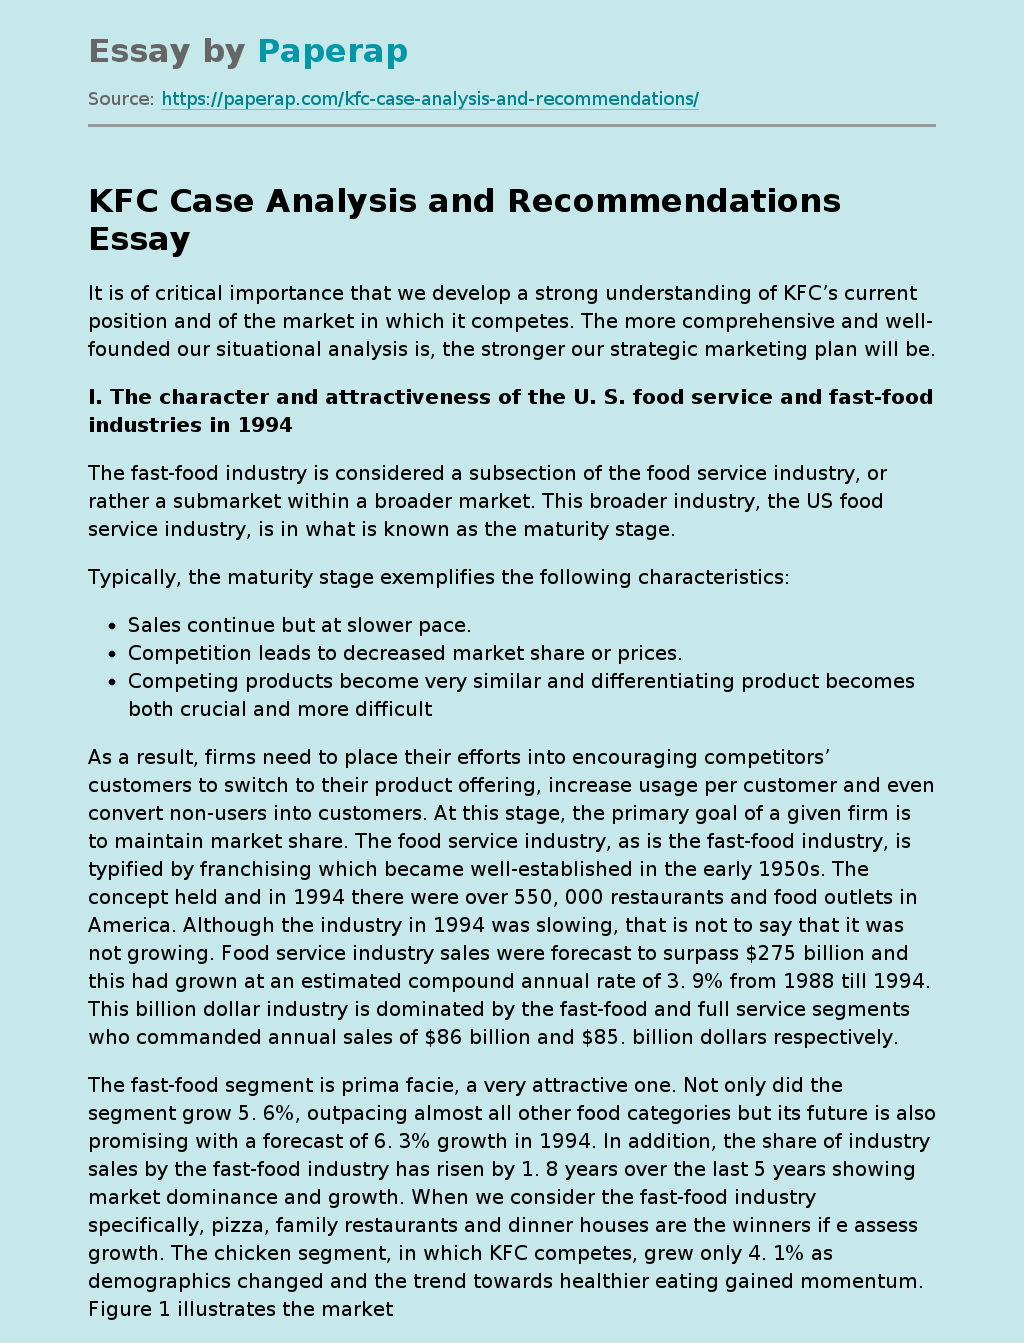 KFC Case Analysis and Recommendations